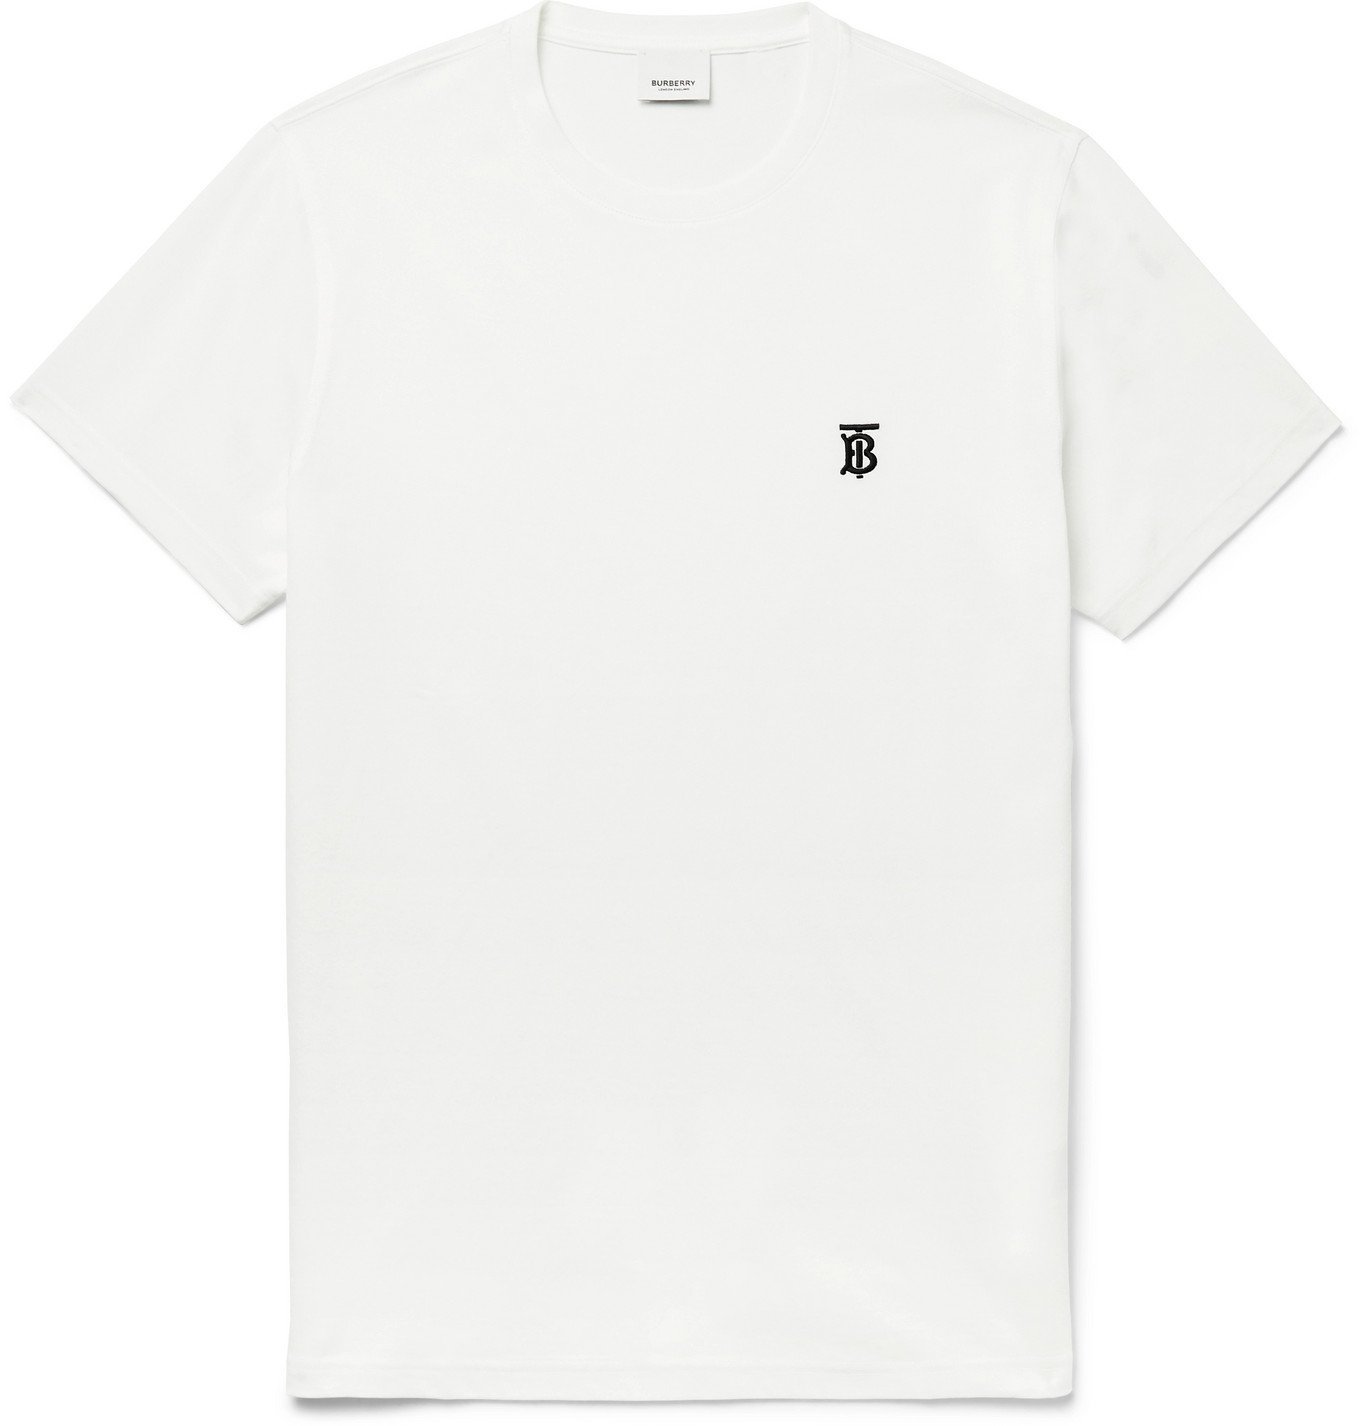 BURBERRY - Logo-Embroidered Cotton-Jersey T-Shirt - White Burberry